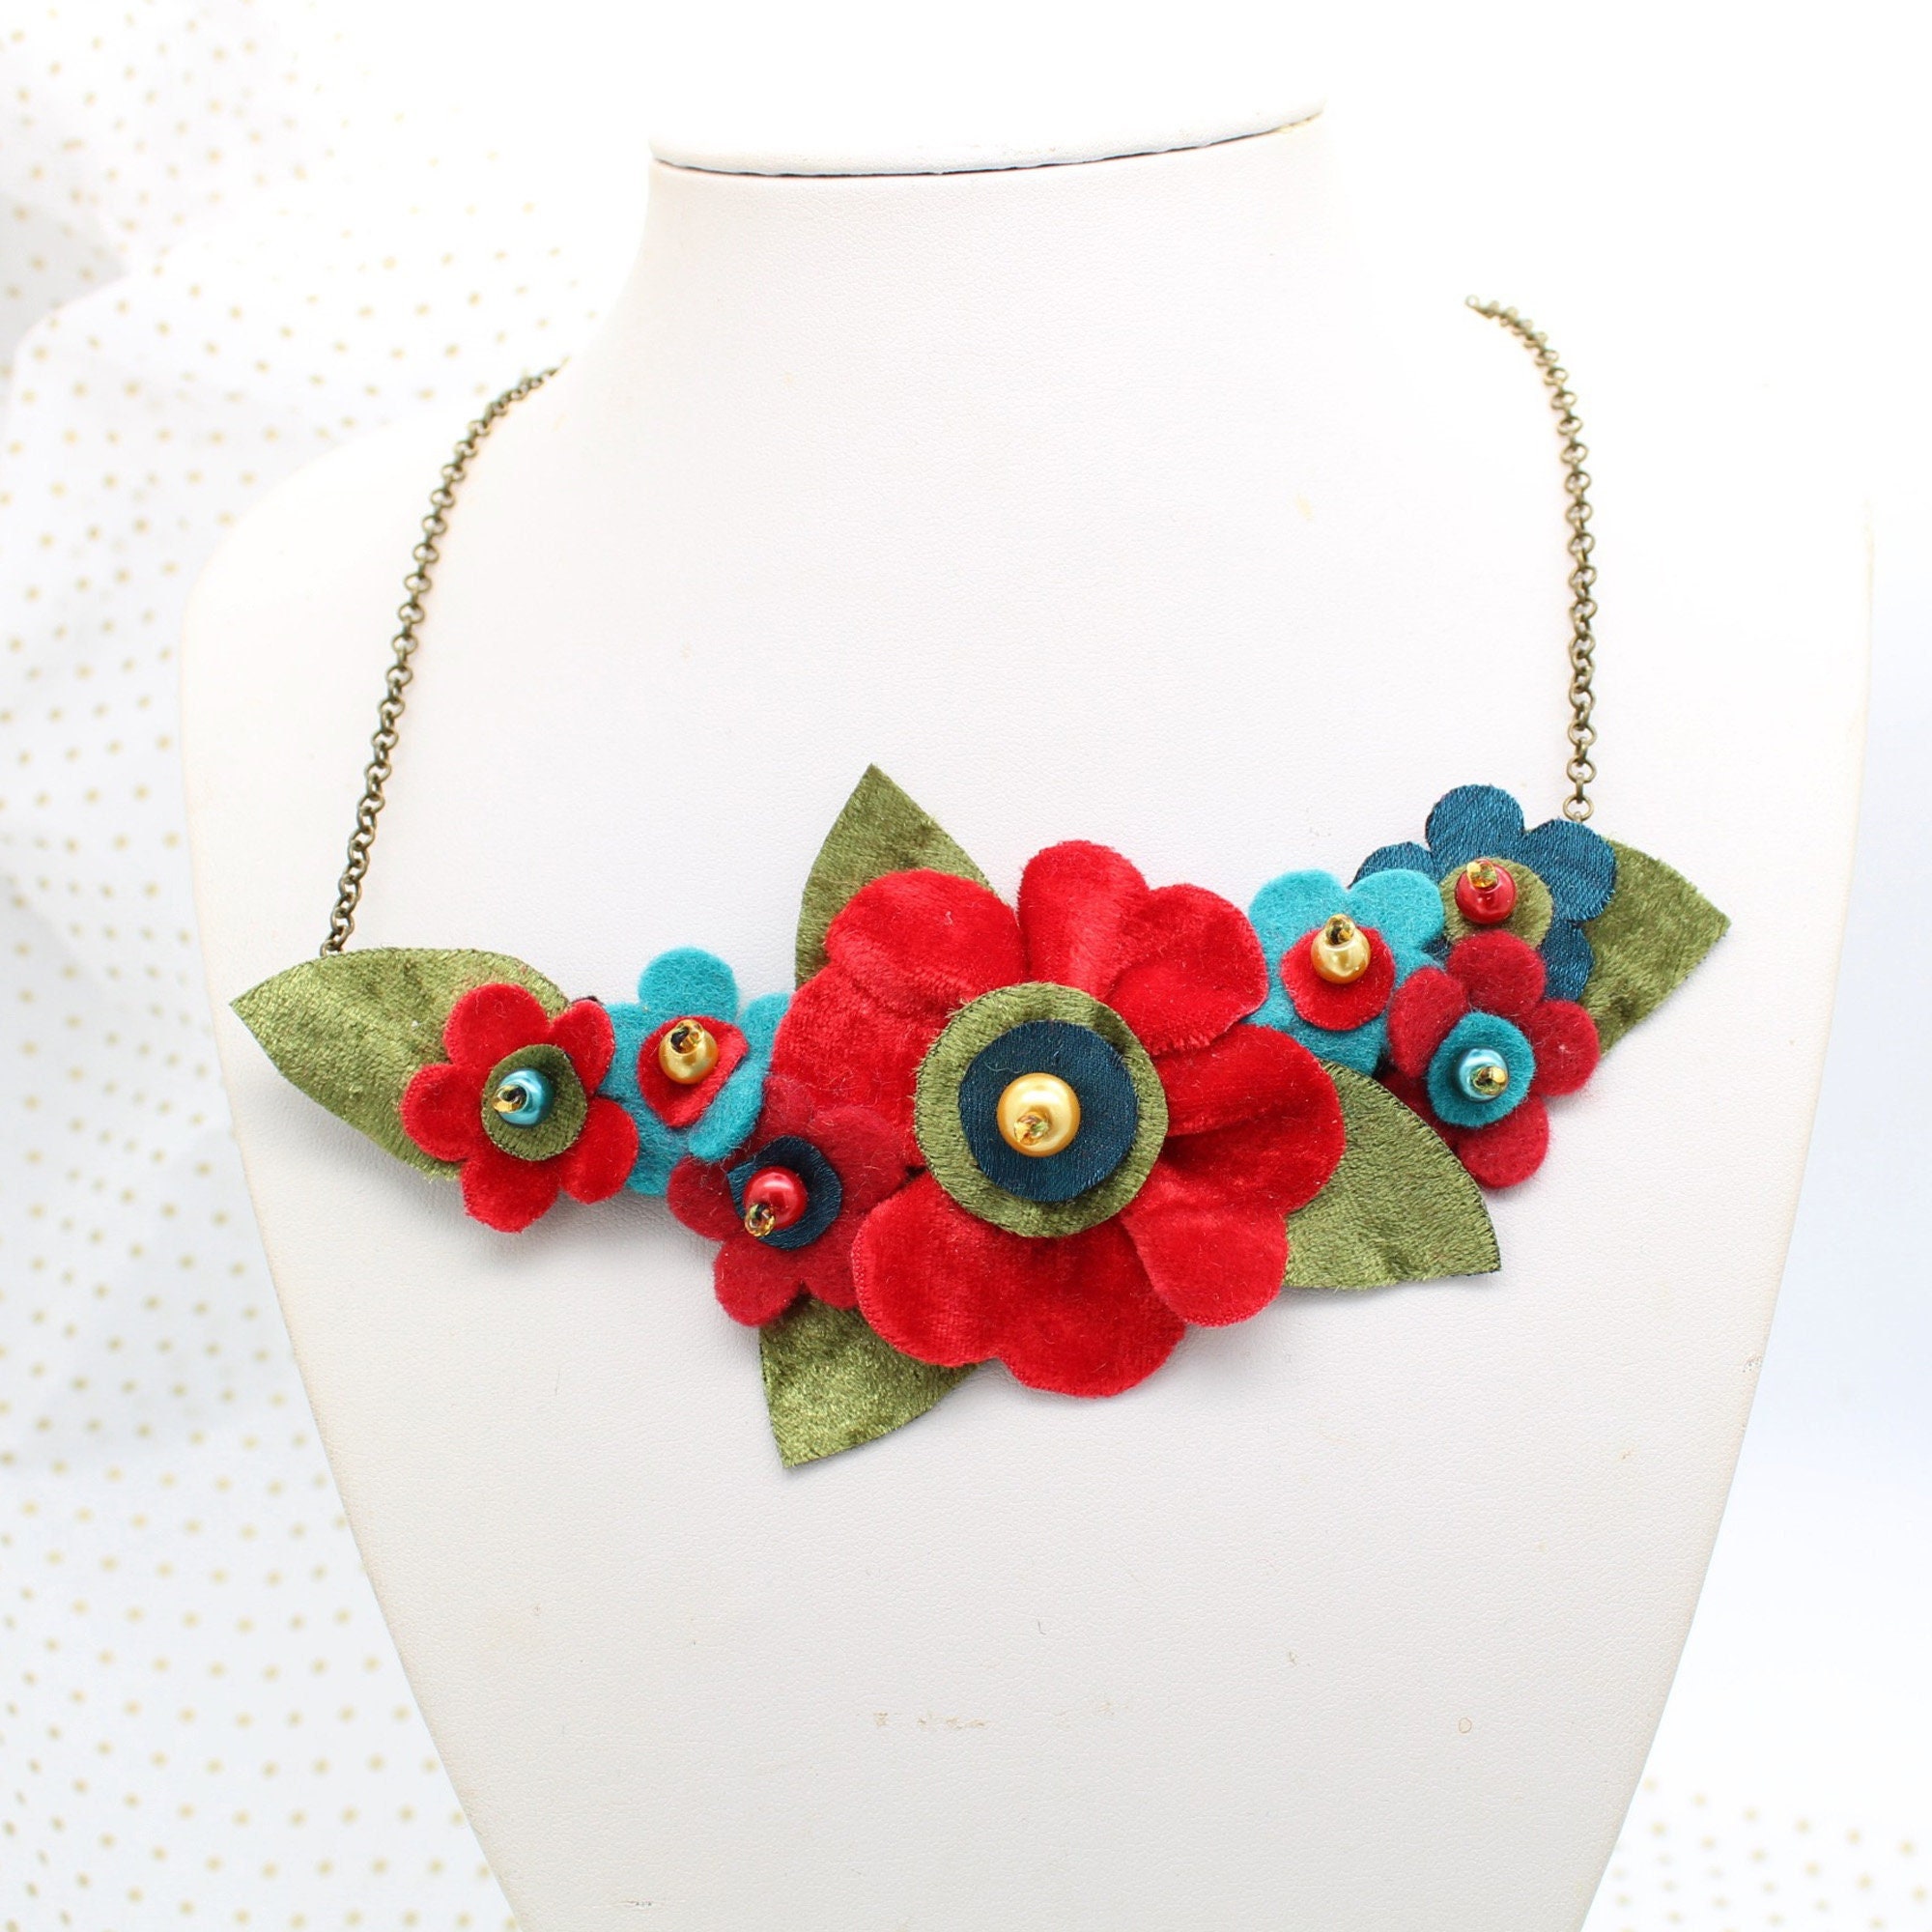 Colourful Red, Teal & Bright Blue Statement Necklace With Hand Cut Sewn Fabric Felt Flowers